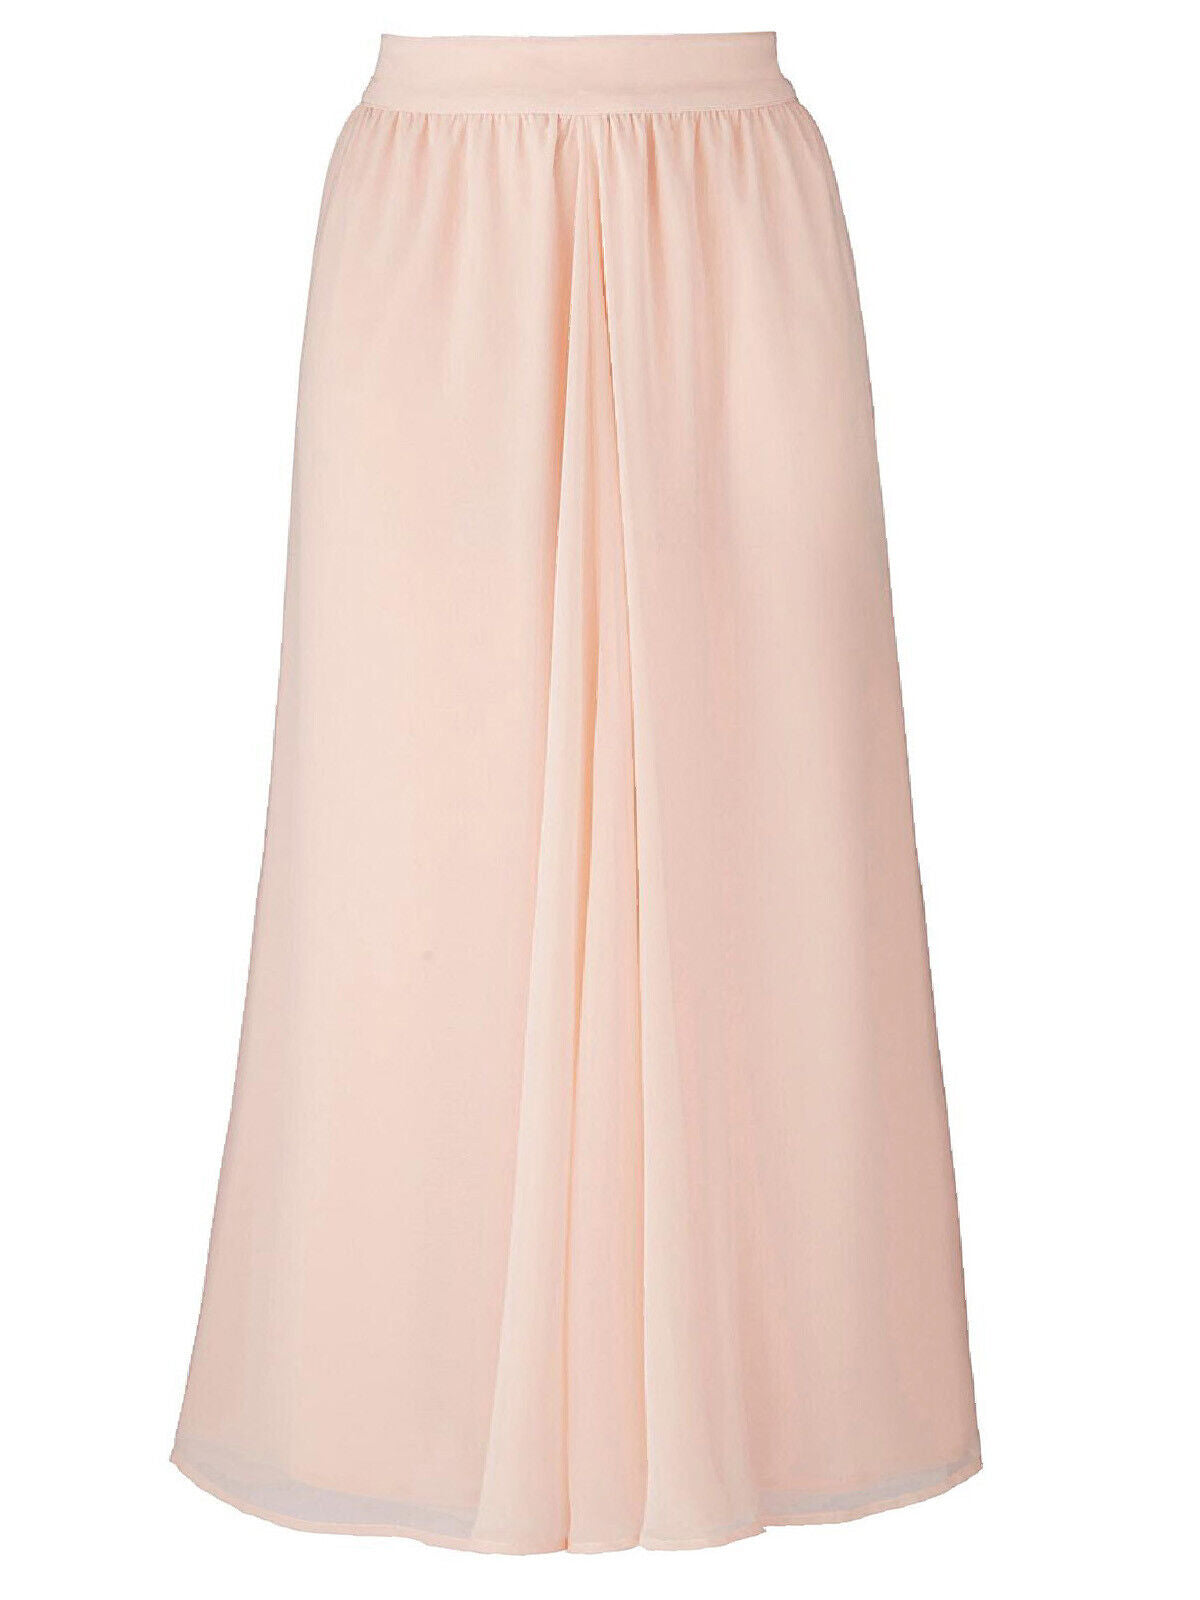 Capsule Dusky Pink Floaty Georgette Maxi Skirt Sizes 16 18 20 22 24 26 28 32